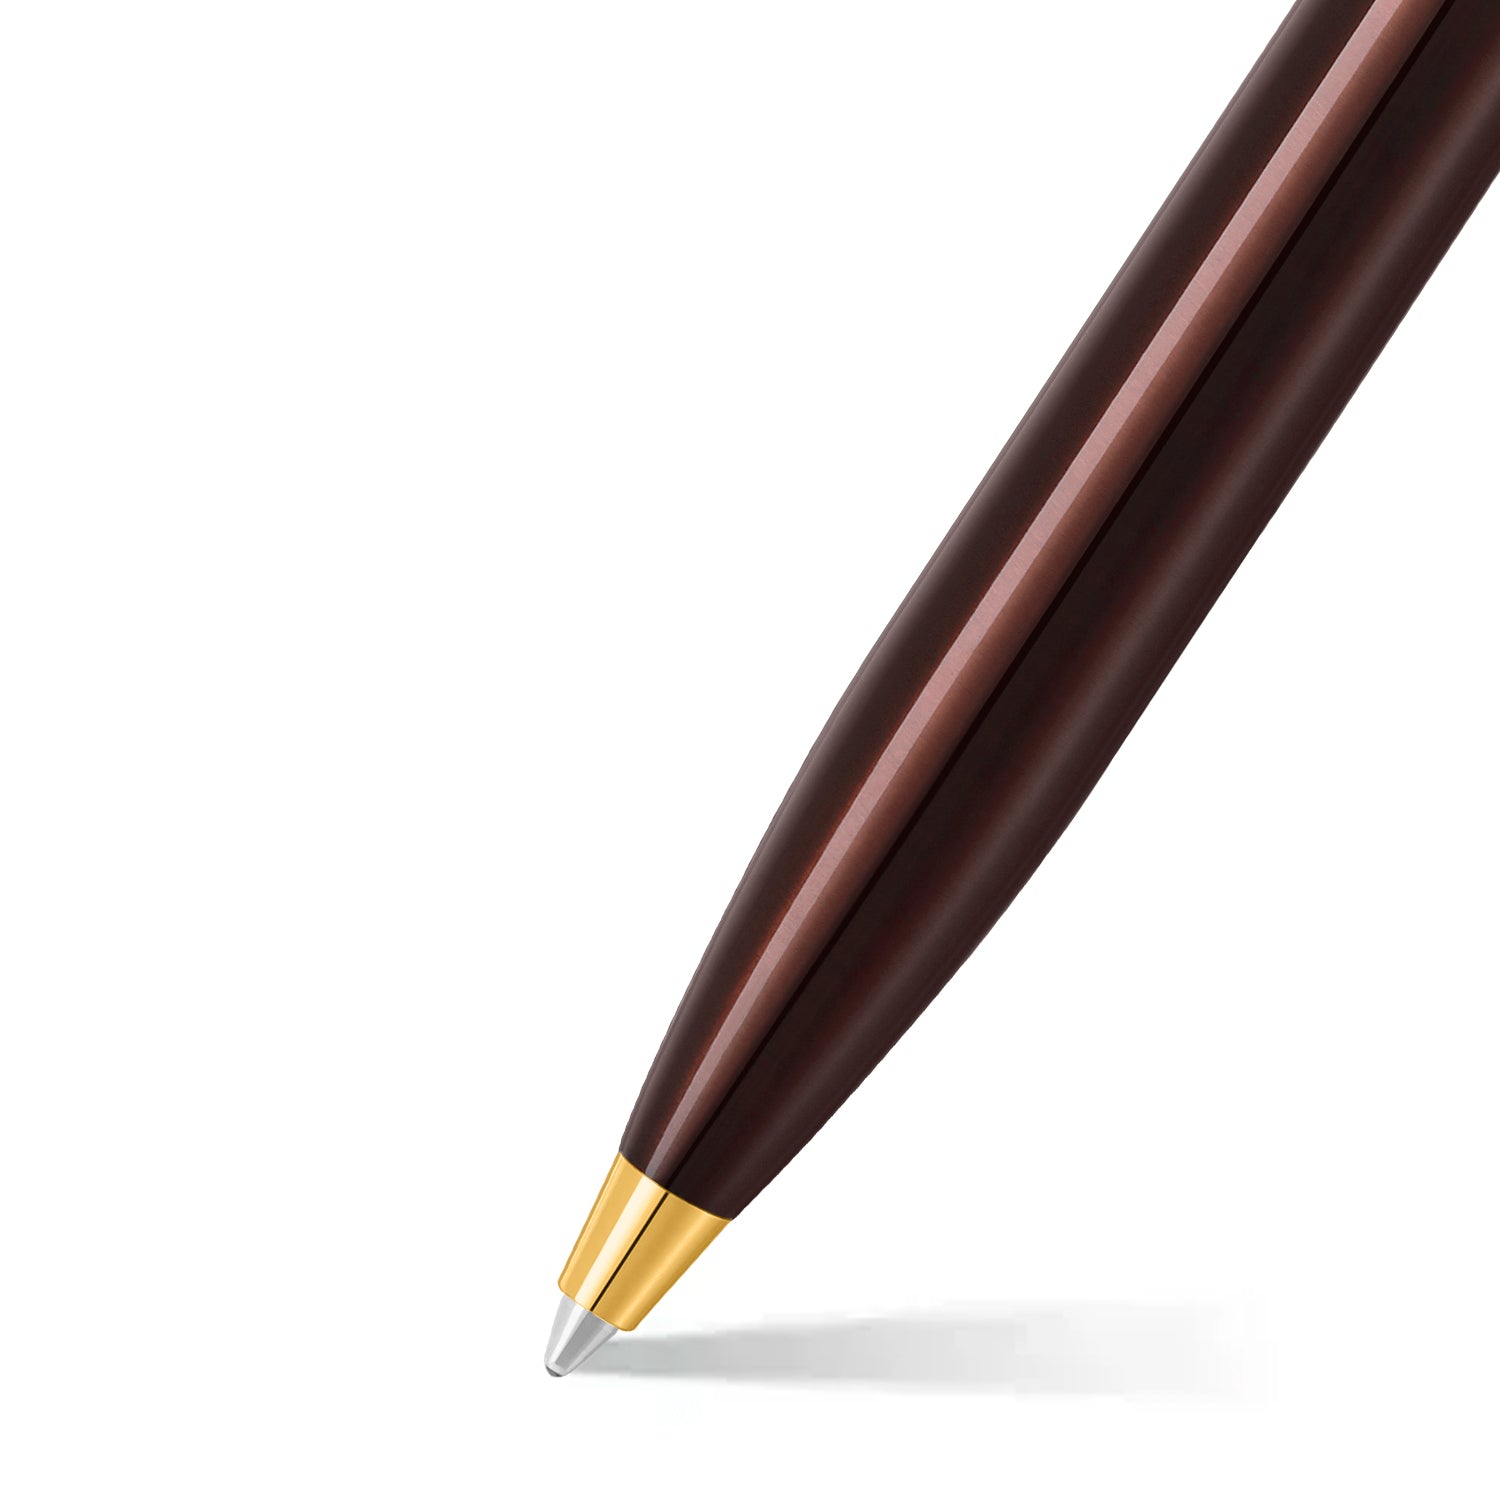 A Sheaffer® 100 9370 Glossy Coffee Brown Ballpoint Pen With PVD Gold-Tone Trim on a white background, offering a luxurious writing experience and makes for an ideal gift.